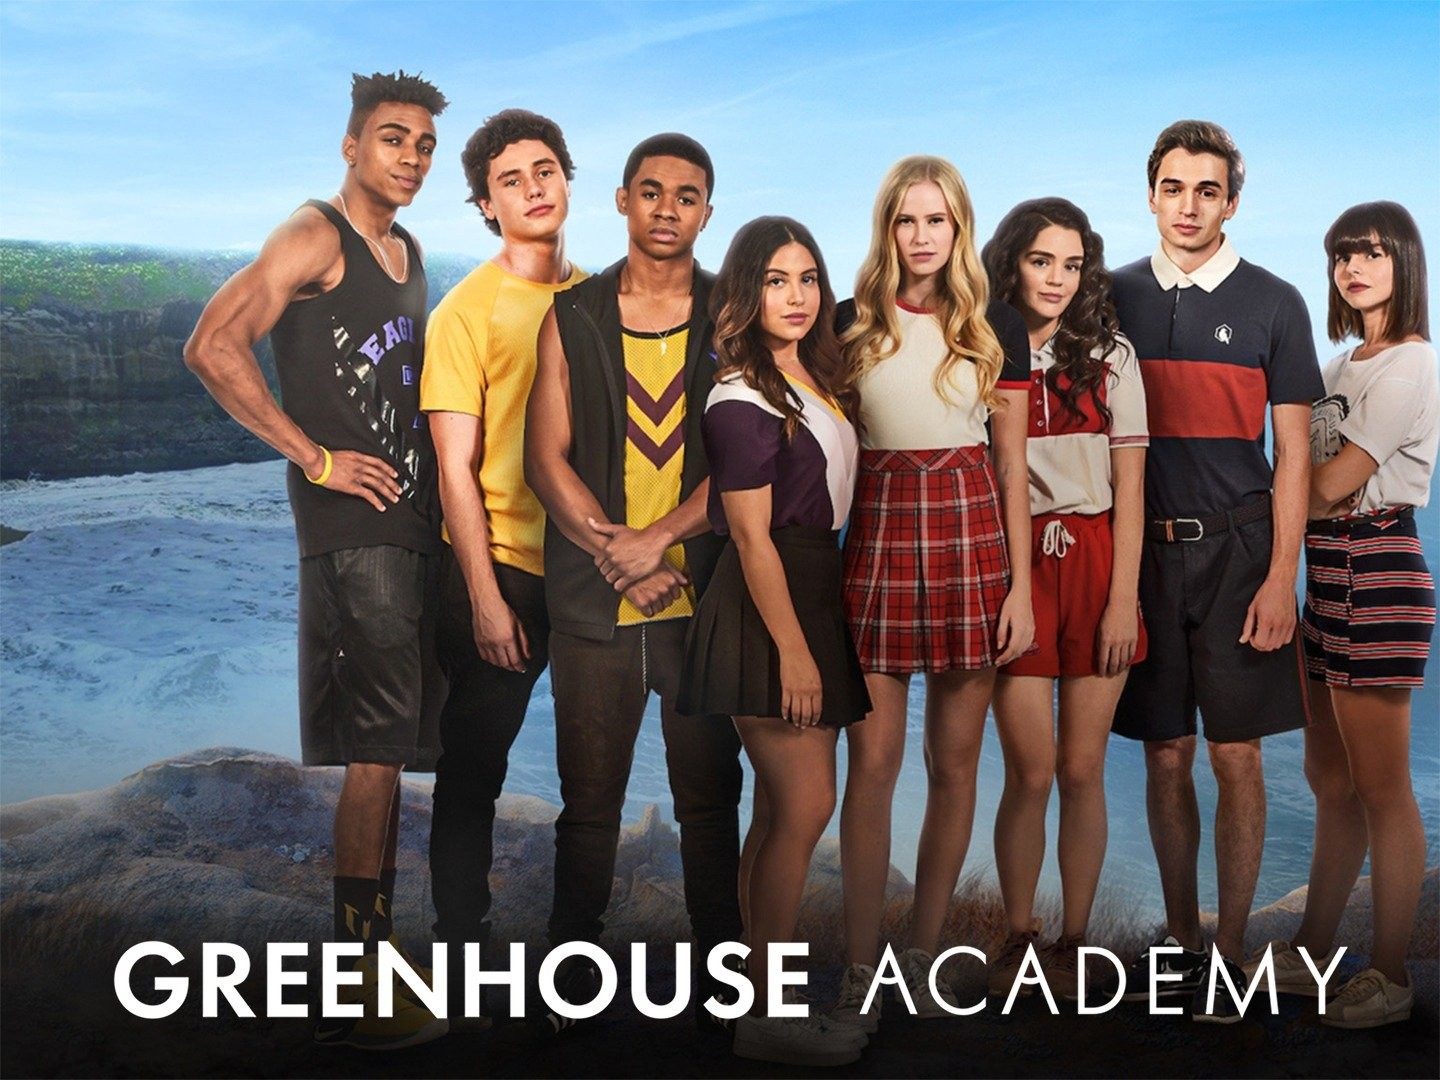 Greenhouse Academy - Rotten Tomatoes